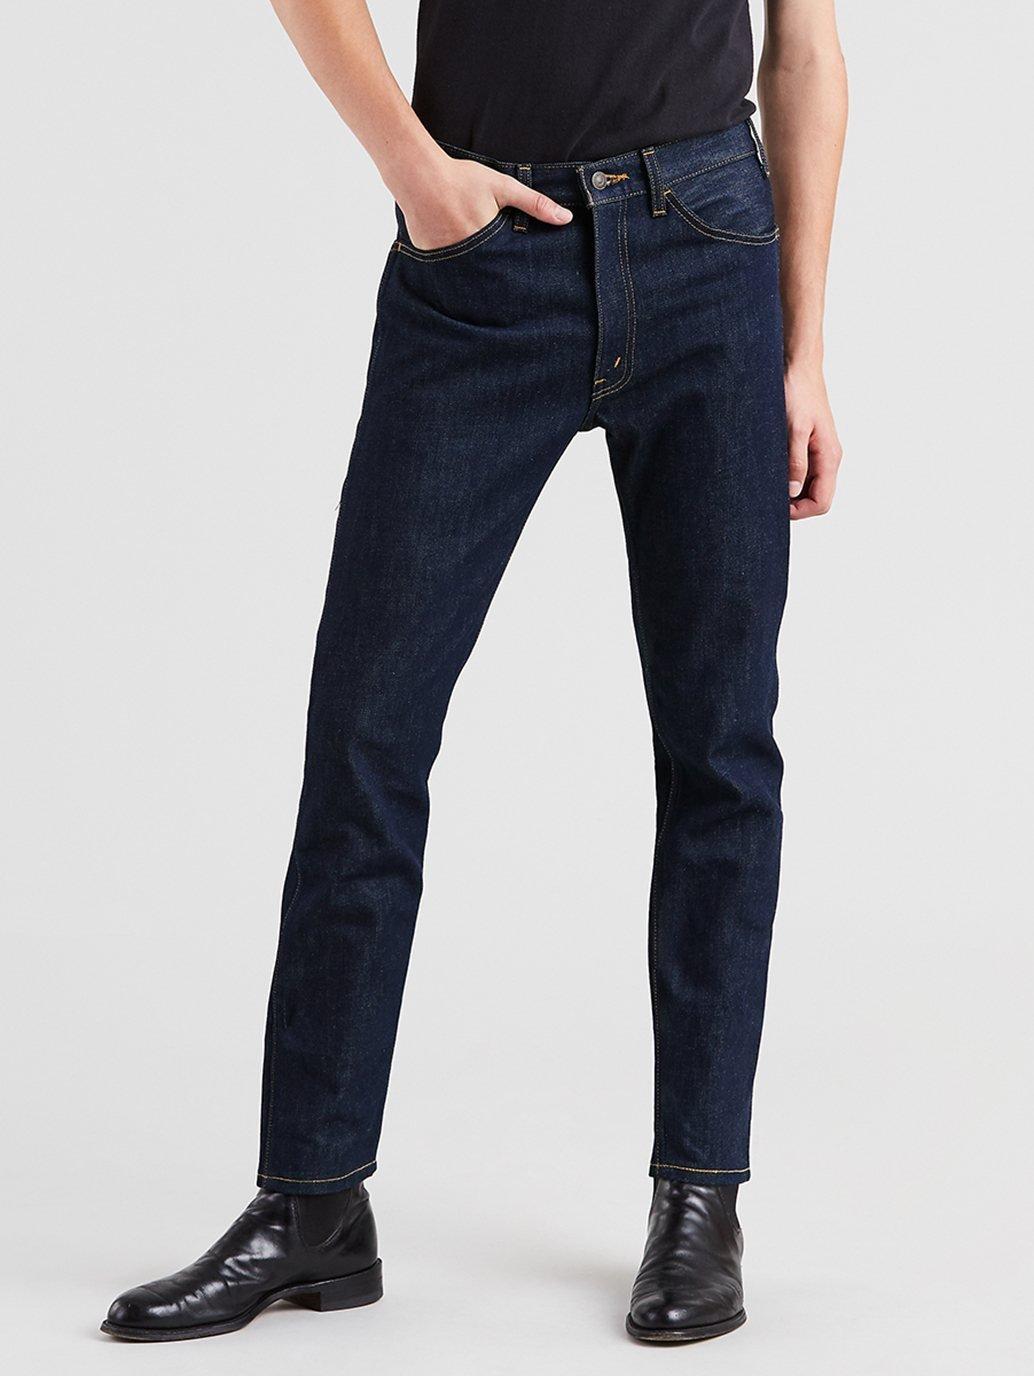 Buy Levi's® Vintage Clothing 1969 606 Jeans | Levi's® Official Online Store  ID